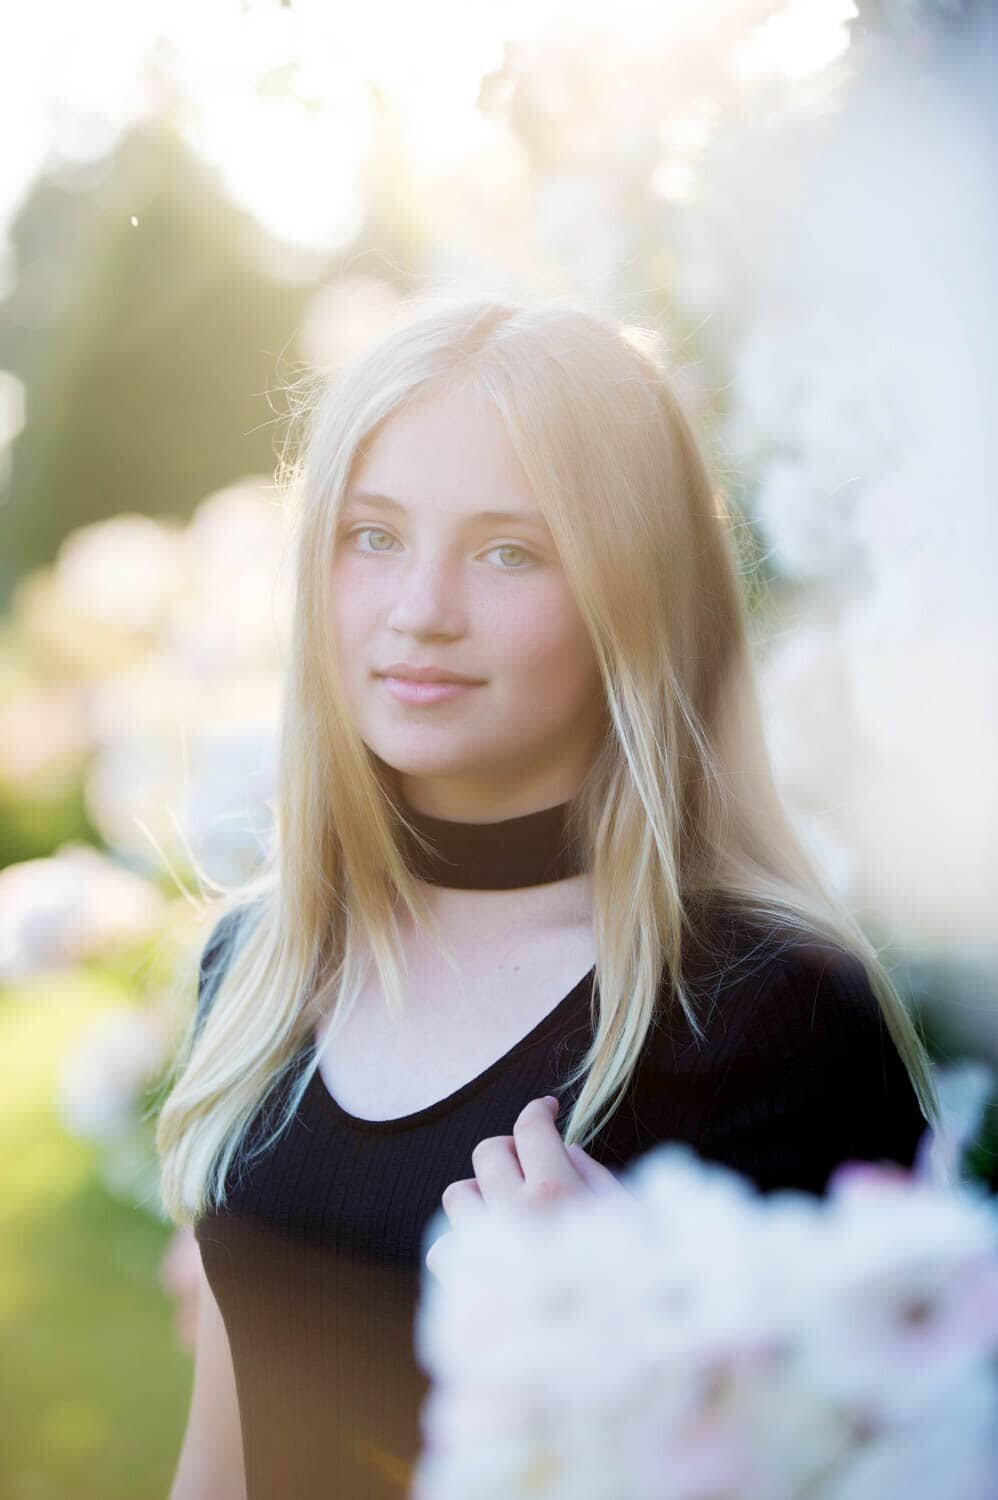 professional headshot of Young woman with blonde hair in a black shirt, standing near white flowers.